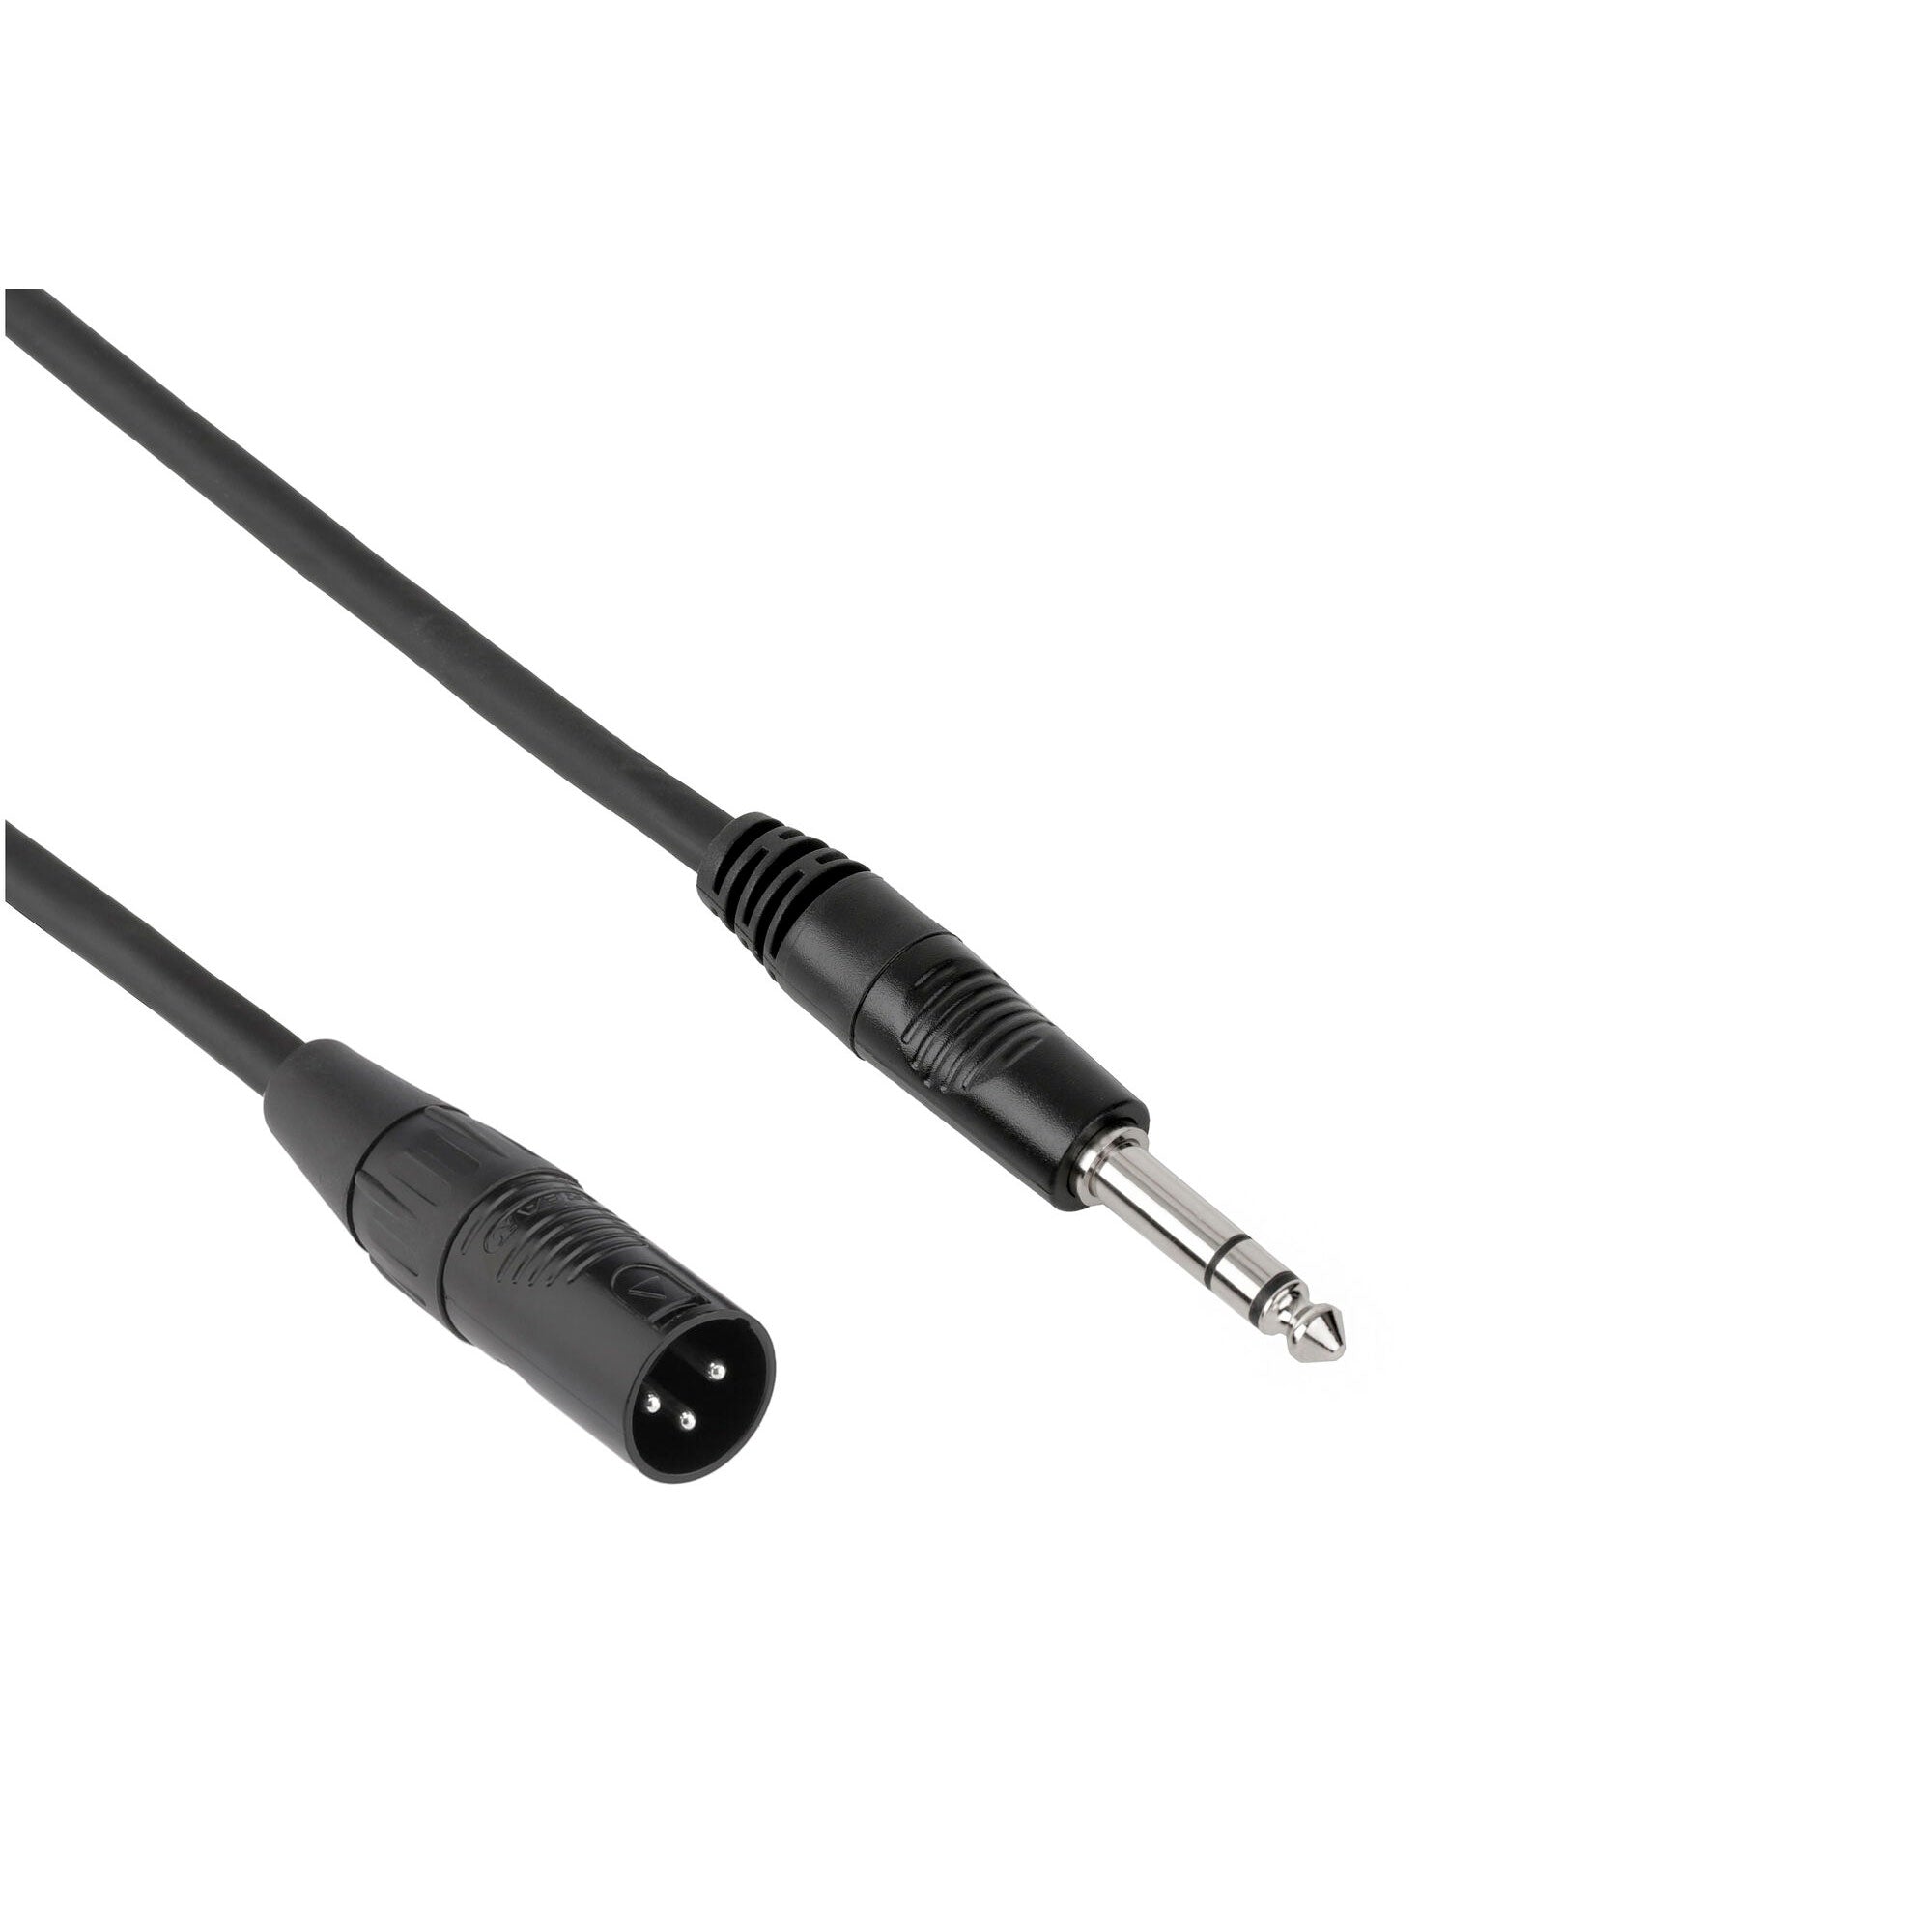 Kirlin Microphone Cable 1M 20AWG XLR M-M Stereo Jack Black